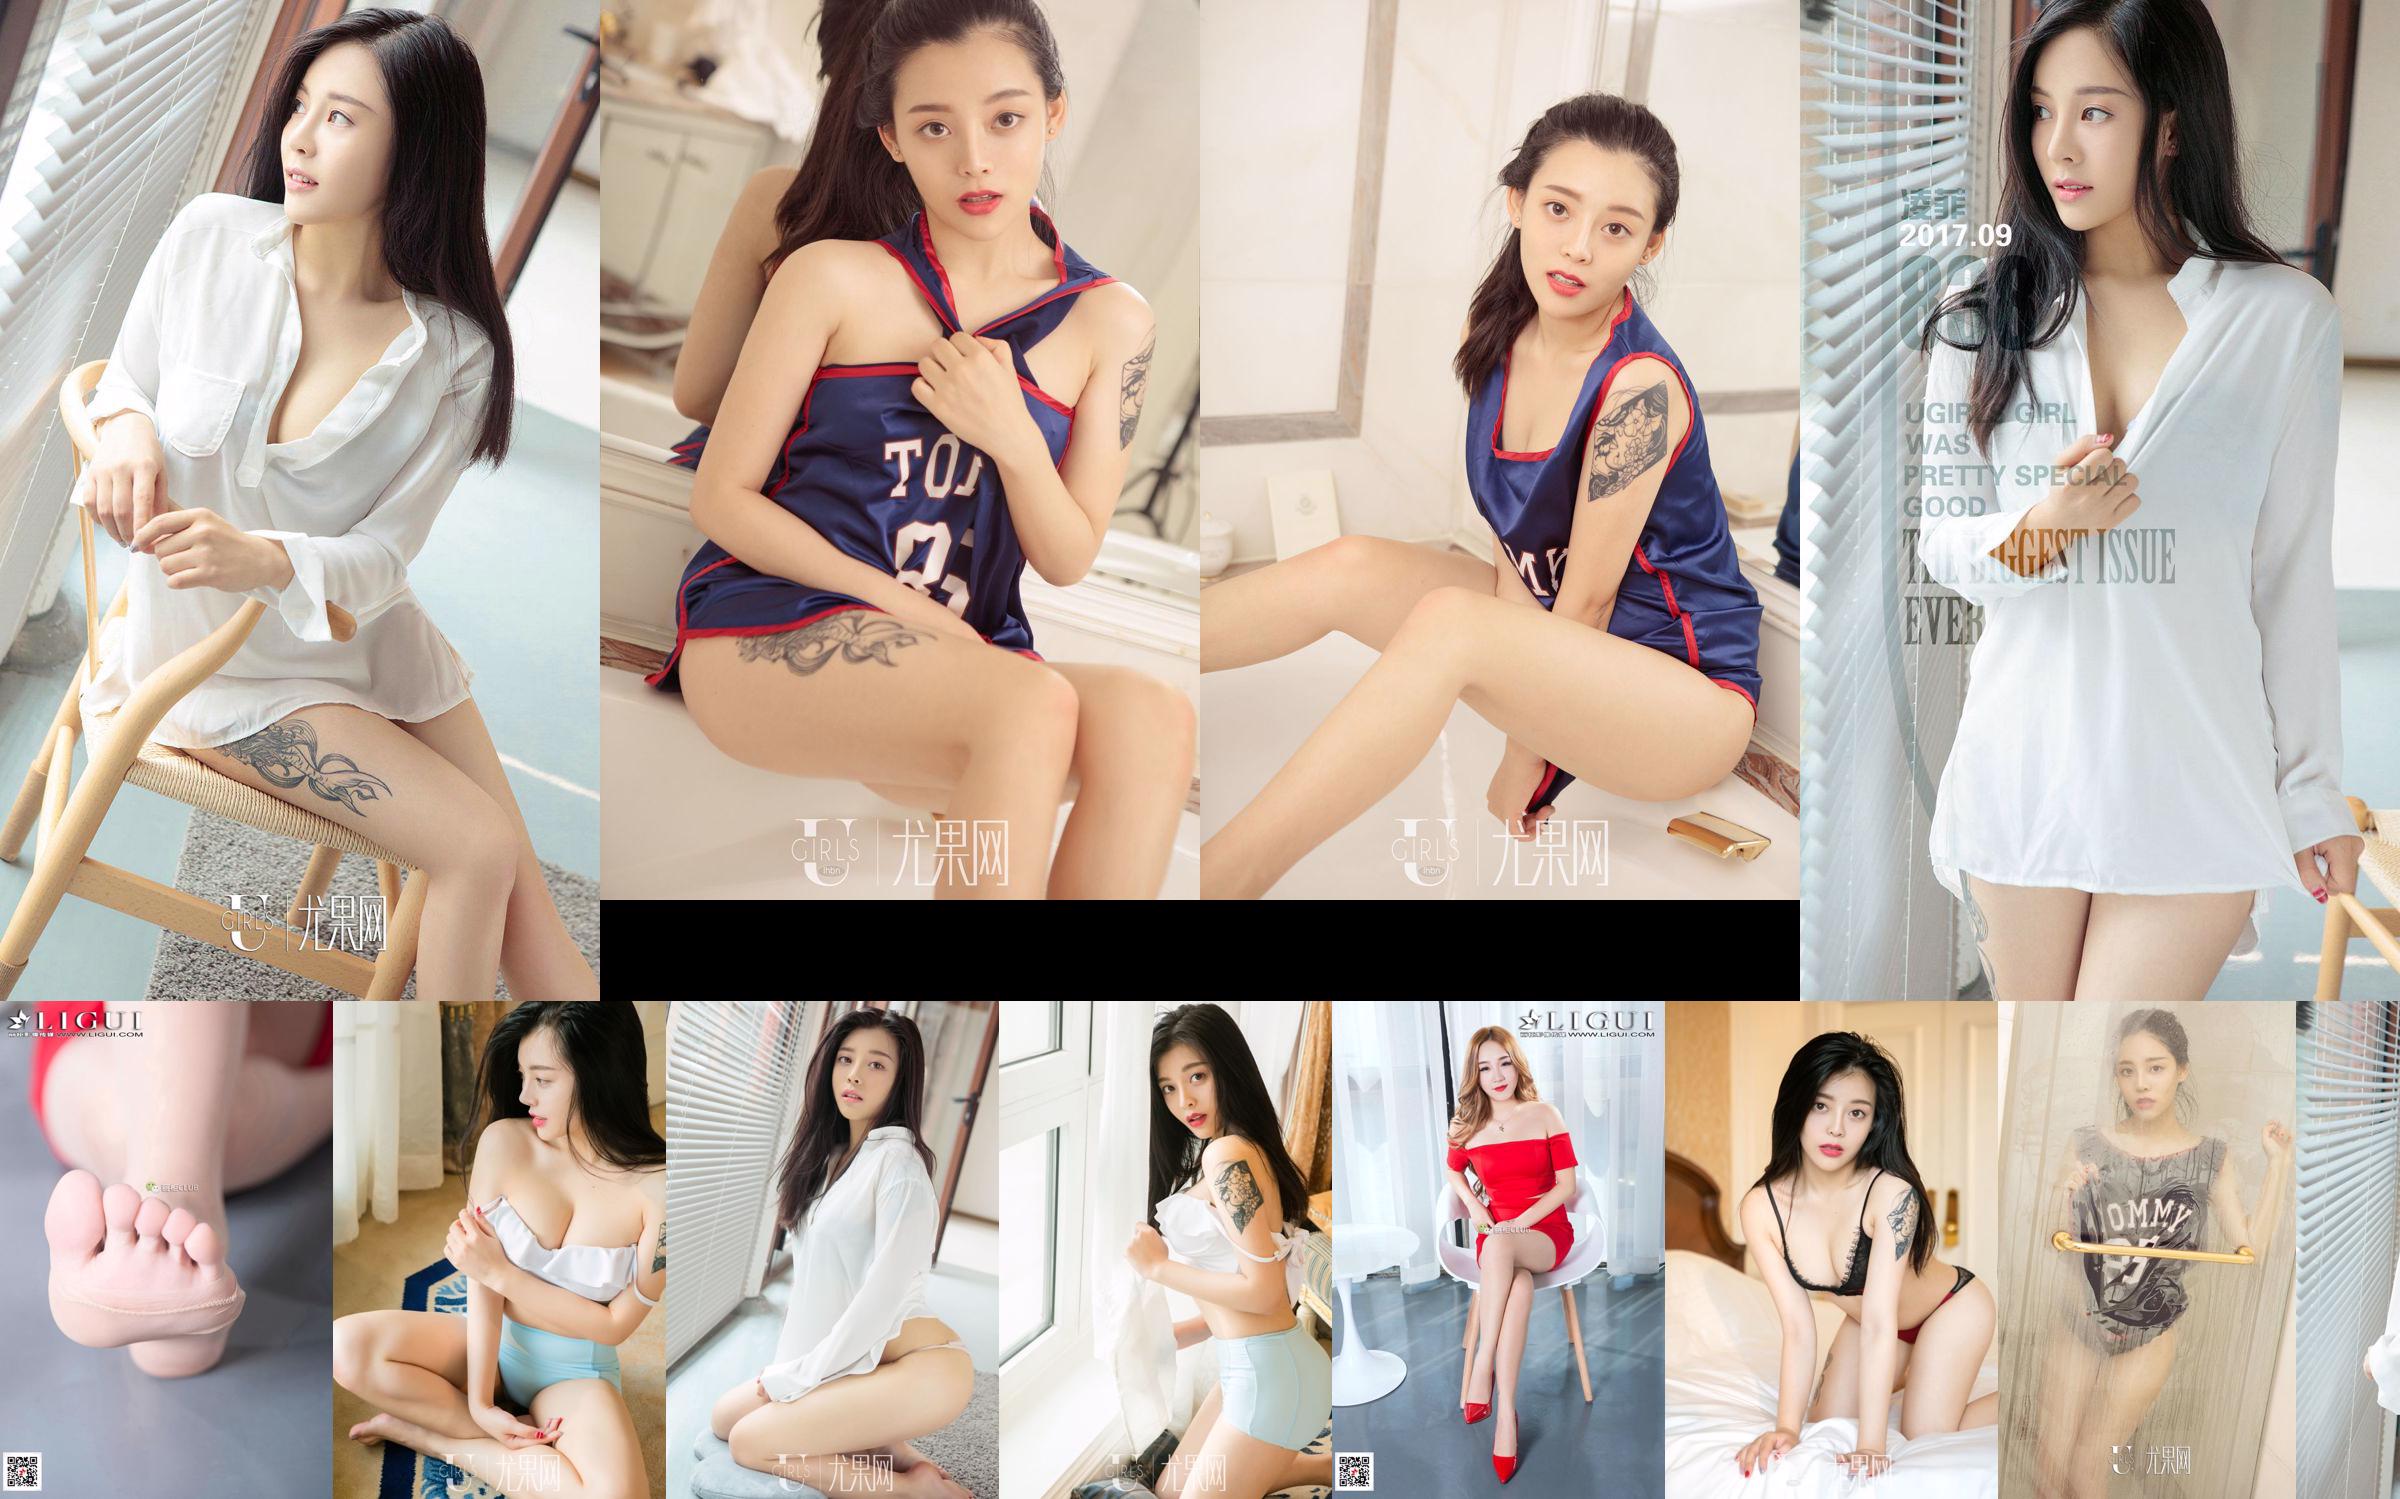 Ling Fei "Drenched Basketball Uniform" [Youguoquan] No.838 No.b830fc Page 1